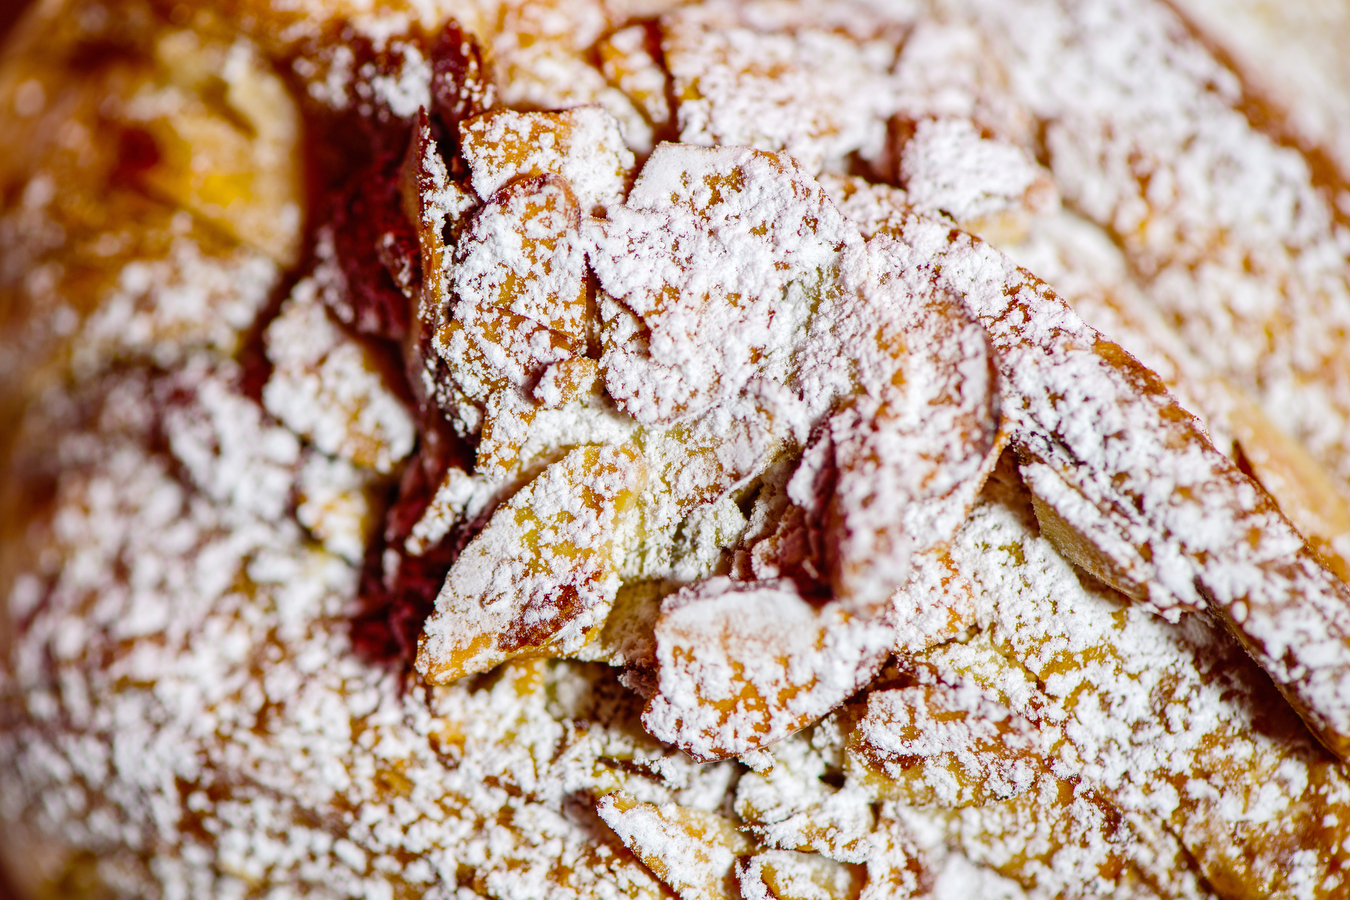 up close shot of an almond croissant